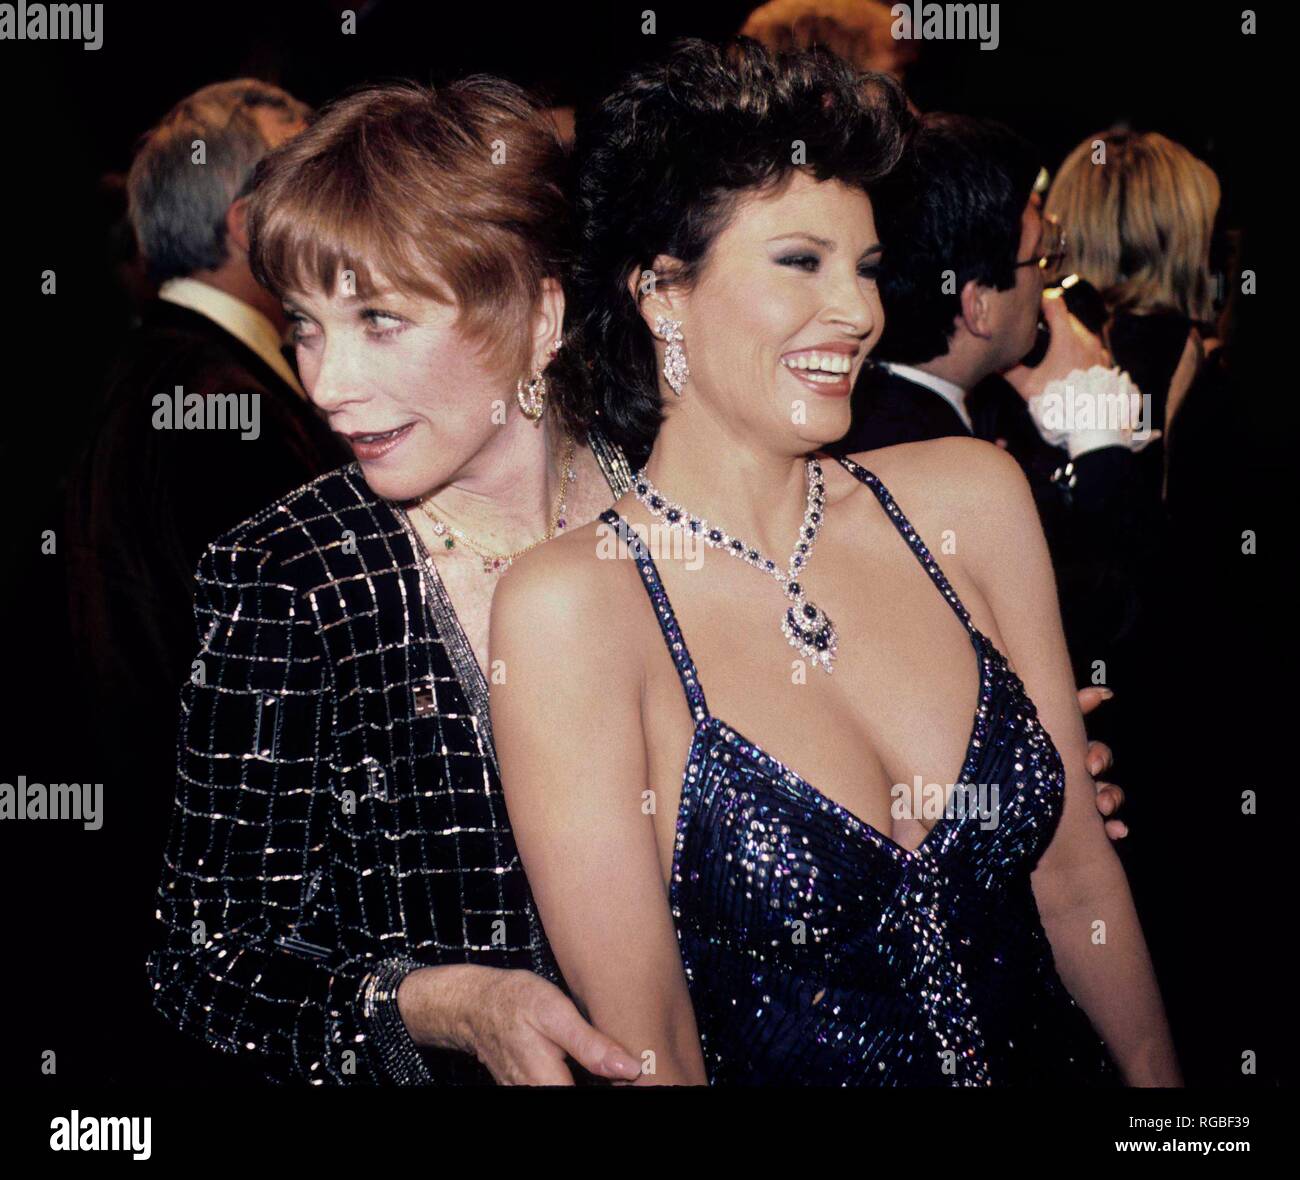 Maclaine Welch3671.JPG New York, NY UNDATED FILE PHOTO Shirley Maclaine Raquel Welch Undated Digital photo by Adam Scull-PHOTOlink.net ONE TIME REPRODUCTION RIGHTS ONLY NO WEBSITE USE WITHOUT AGREEMENT 718-487-4334-OFFICE  718-374-3733-FAX Stock Photo